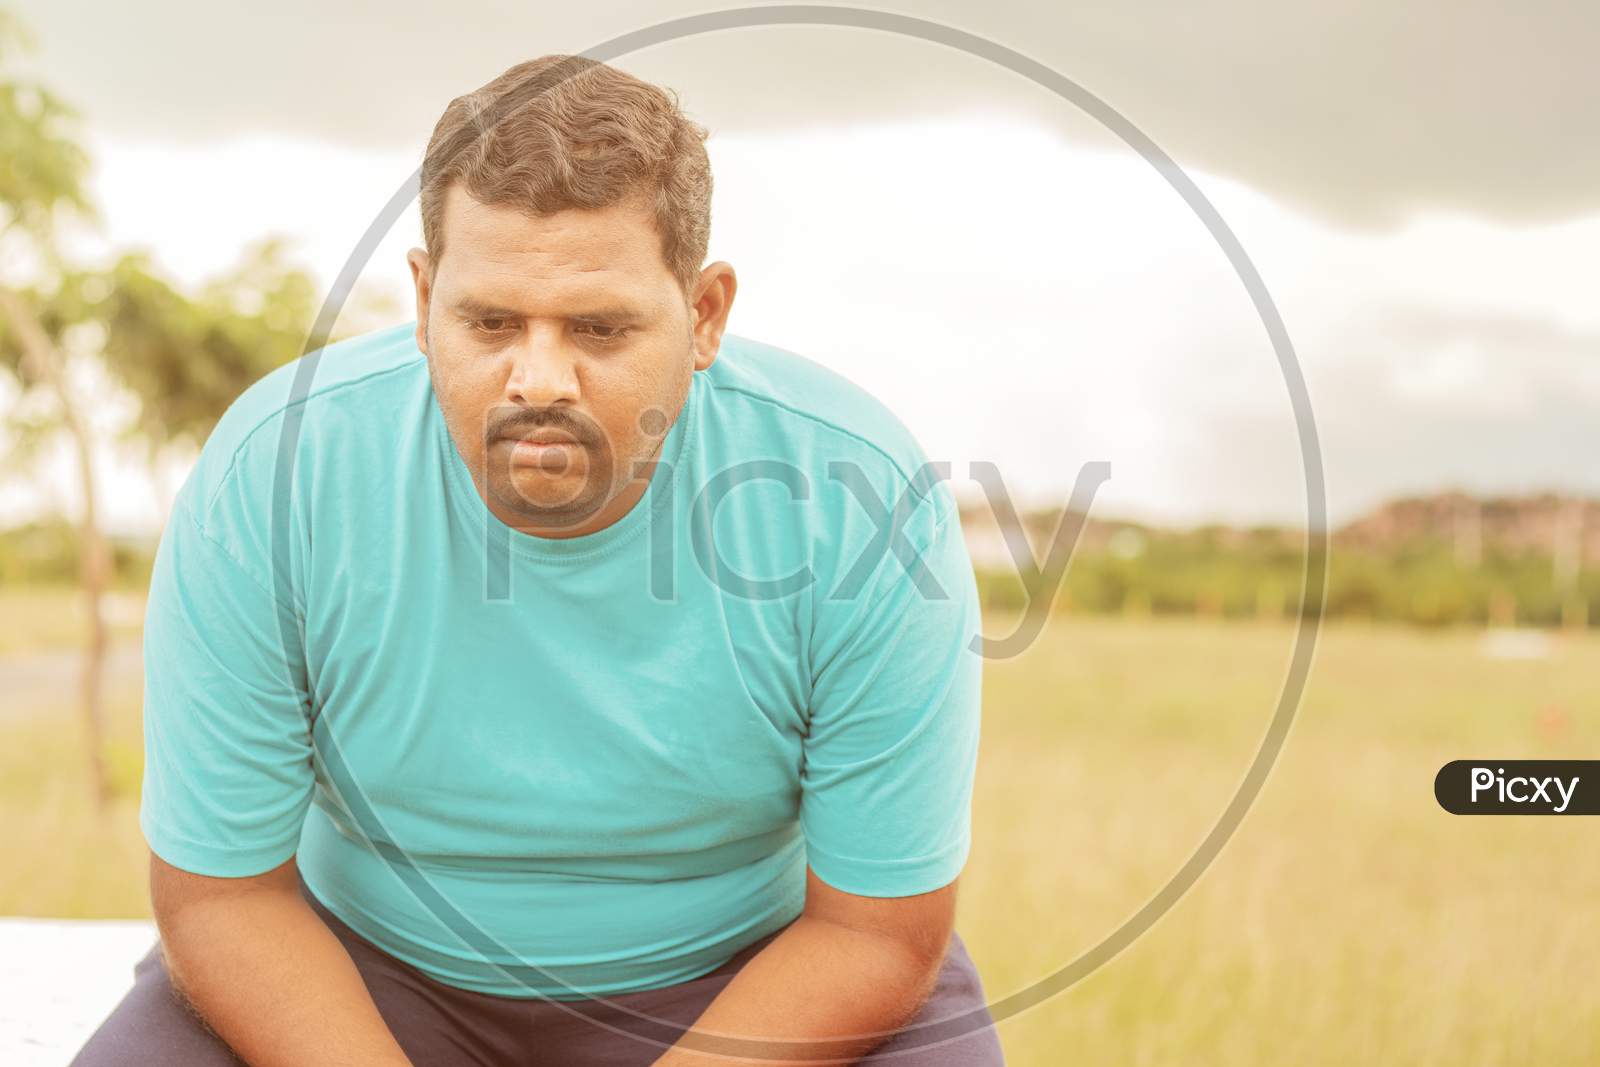 Seriously Fat Man On Outdoor, Park - Concept Of Sadness Due Overweight - Indian Obese Man Feeling Unhappy Or Depressed.